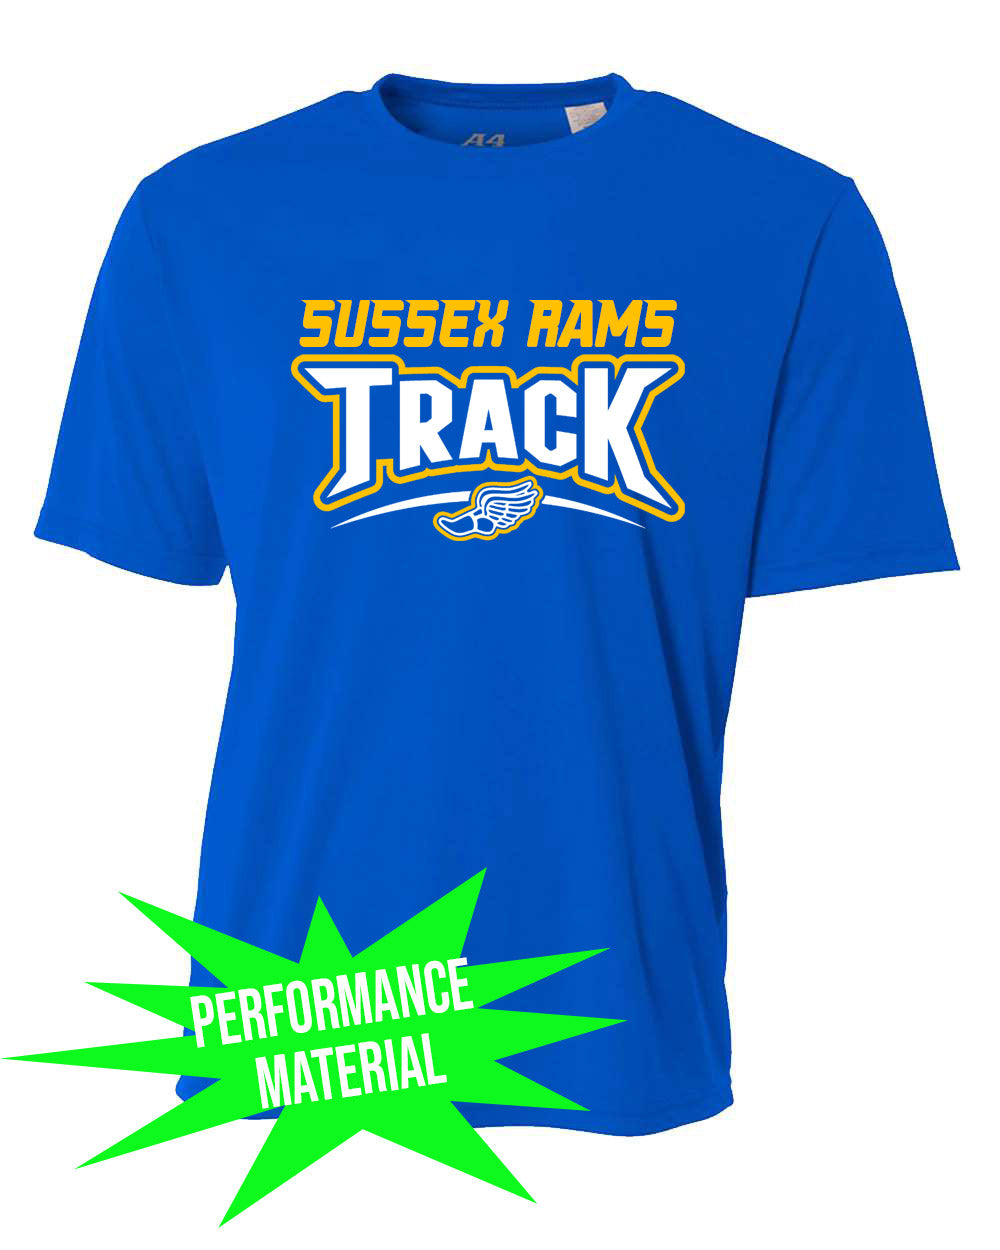 Sussex Rams Track Performance Material T-Shirt Team shirts